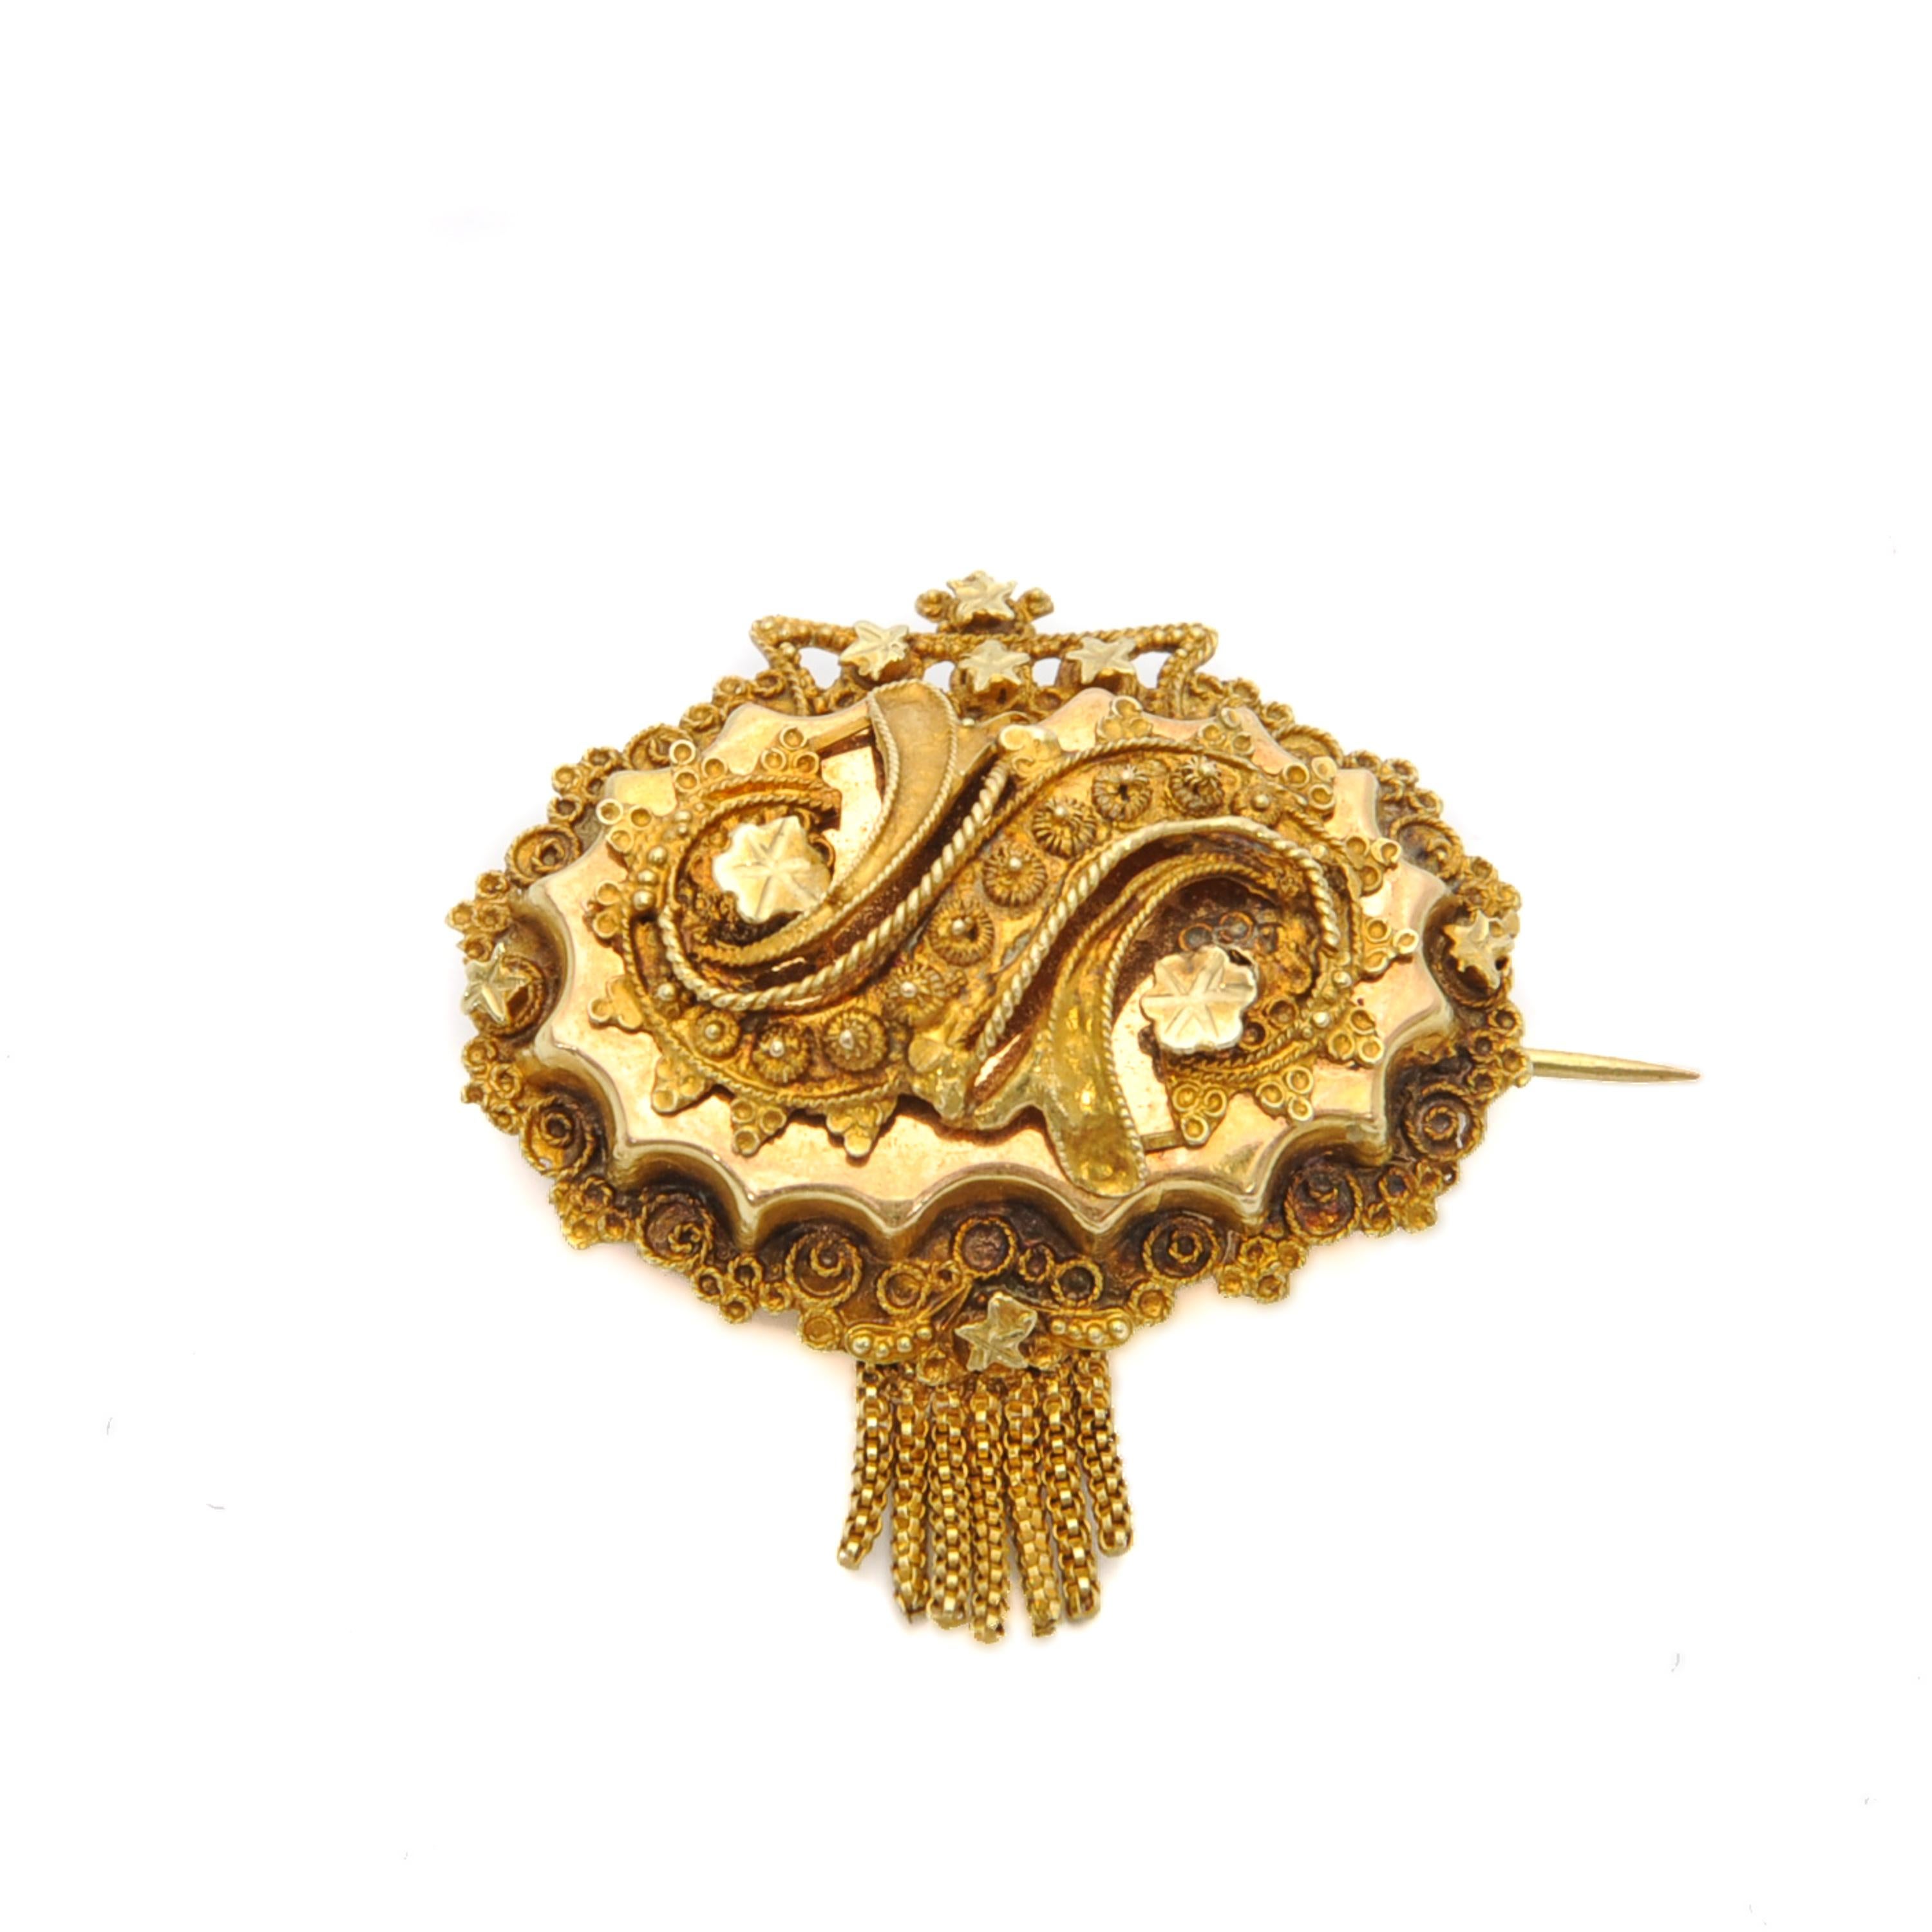 This is an antique 19th century 14 karat gold brooch created with fine cannetille work. The oval-shaped brooch is embellished with cannetille work, stars and a crown on top. The brooch is set with seven tassels below the top which swing freely.